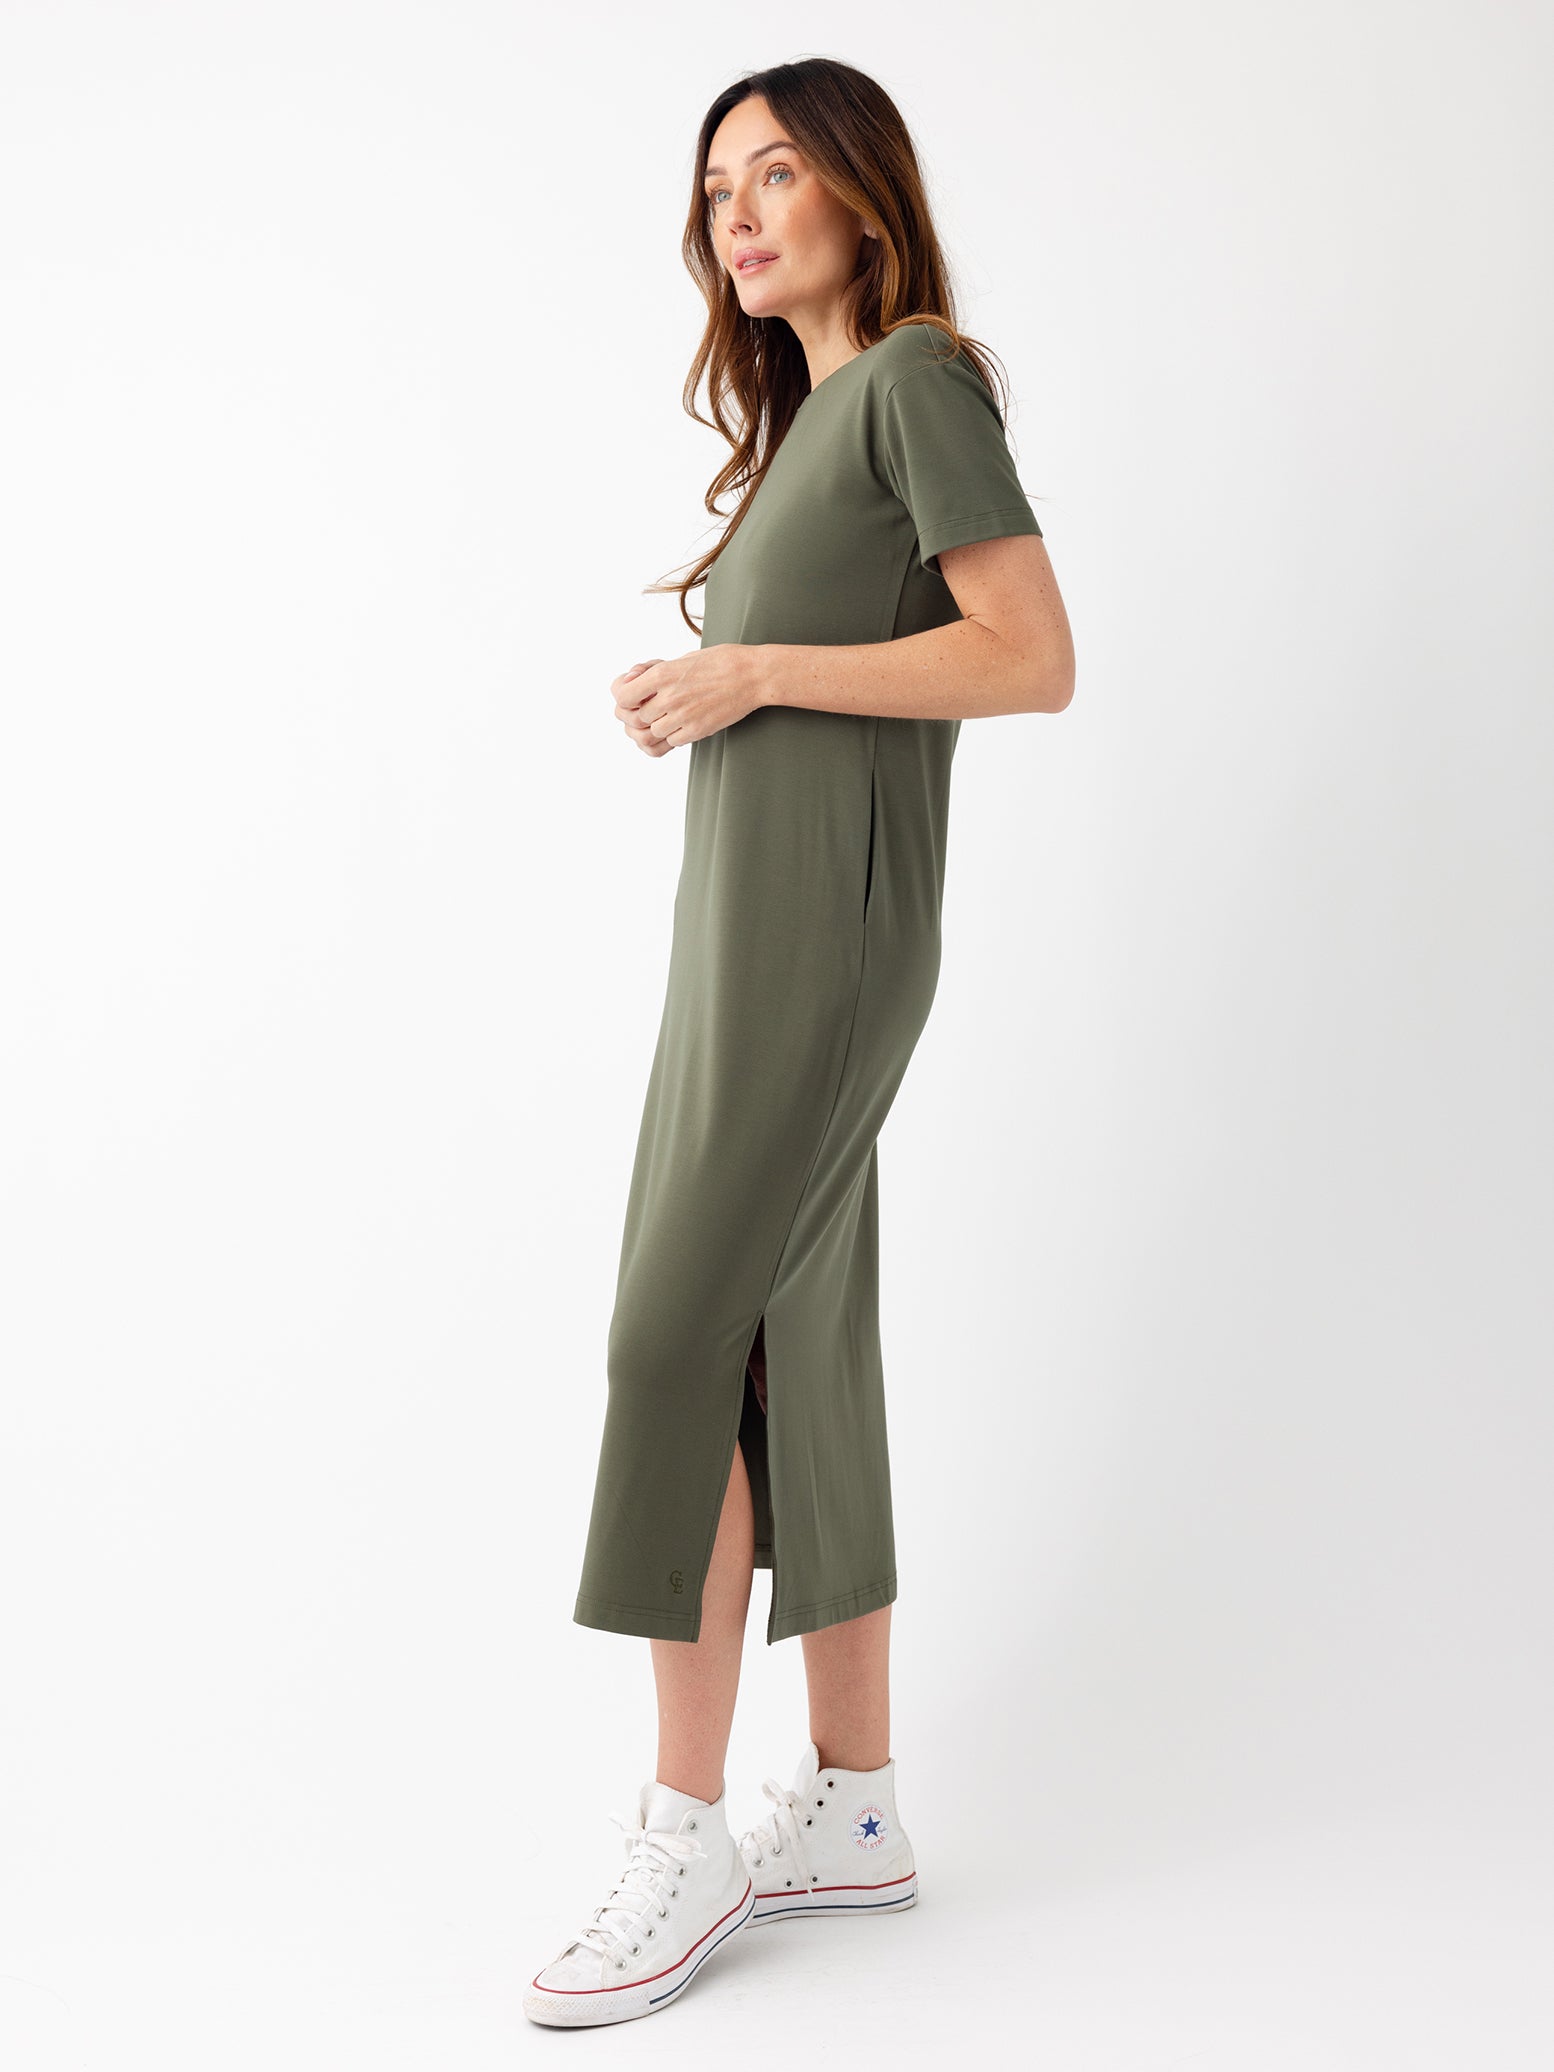 Woman in olive midi dress with white background 